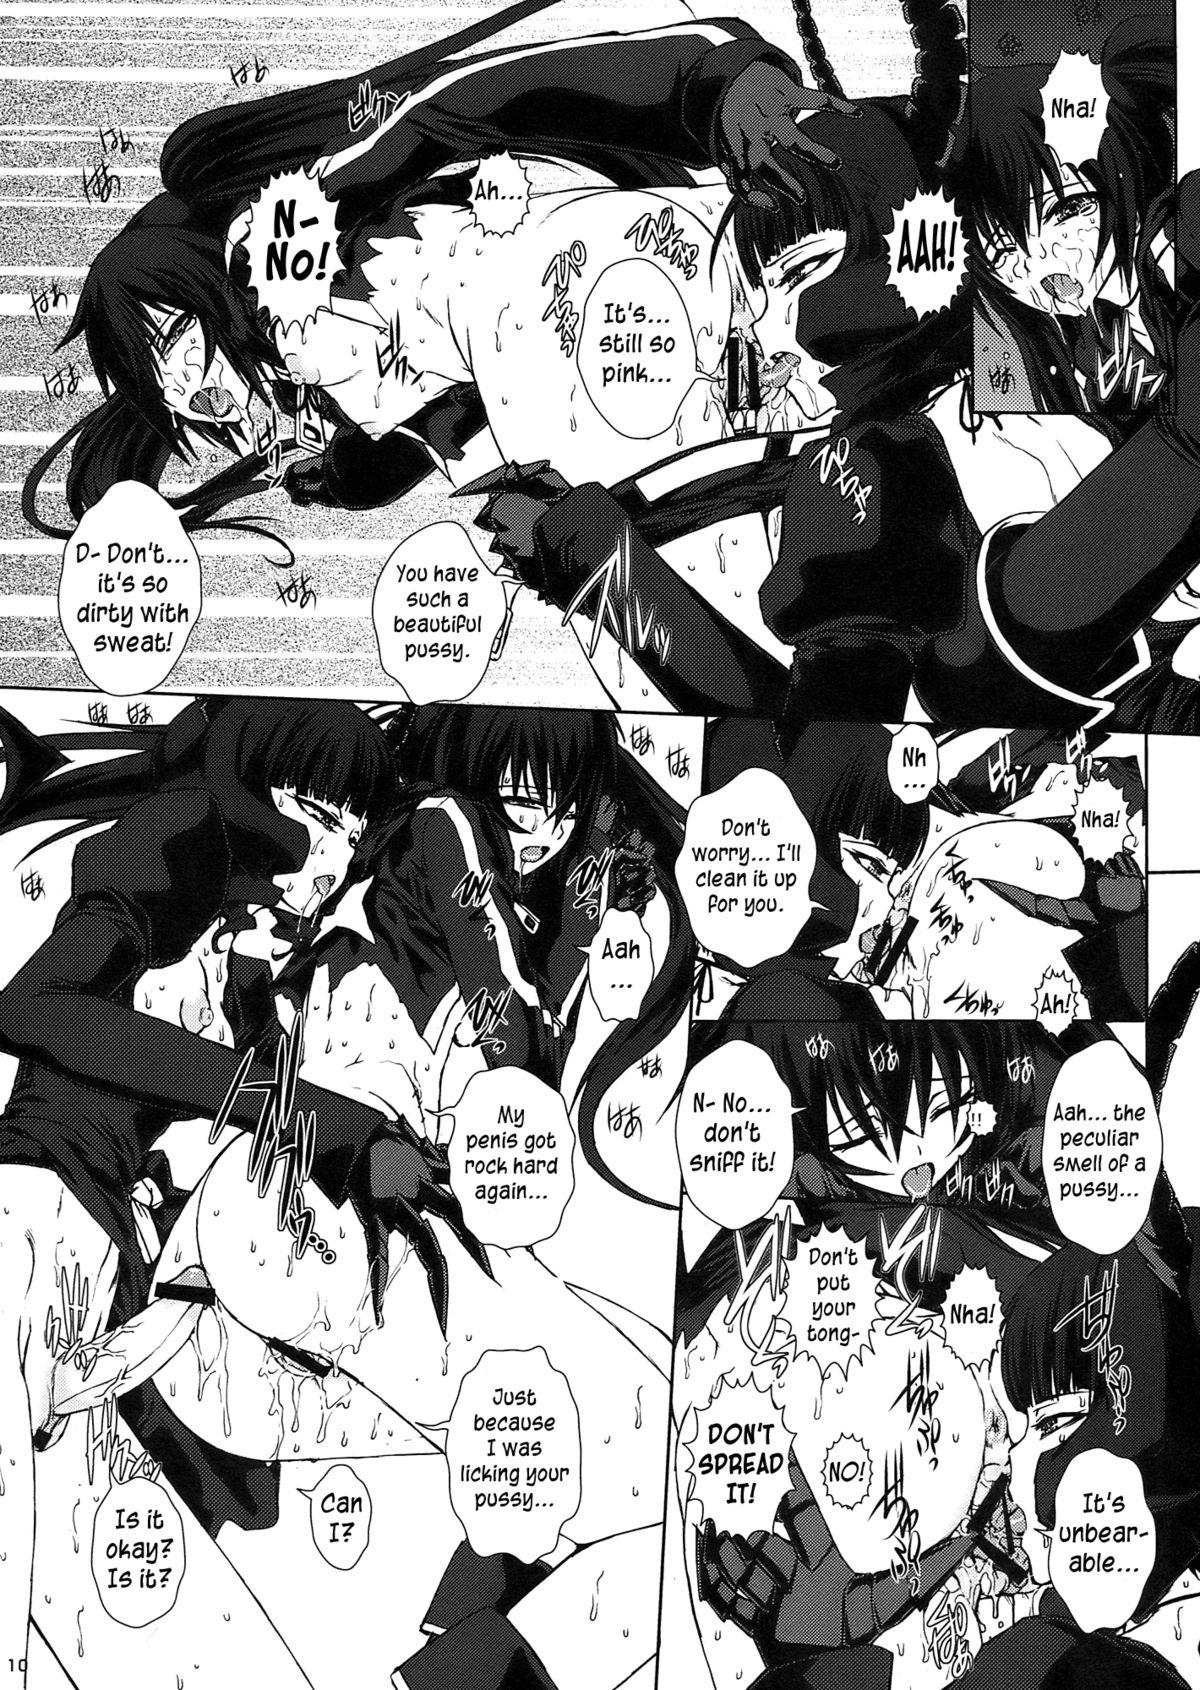 Massages B★RS SAND! - Black rock shooter Special Locations - Page 12